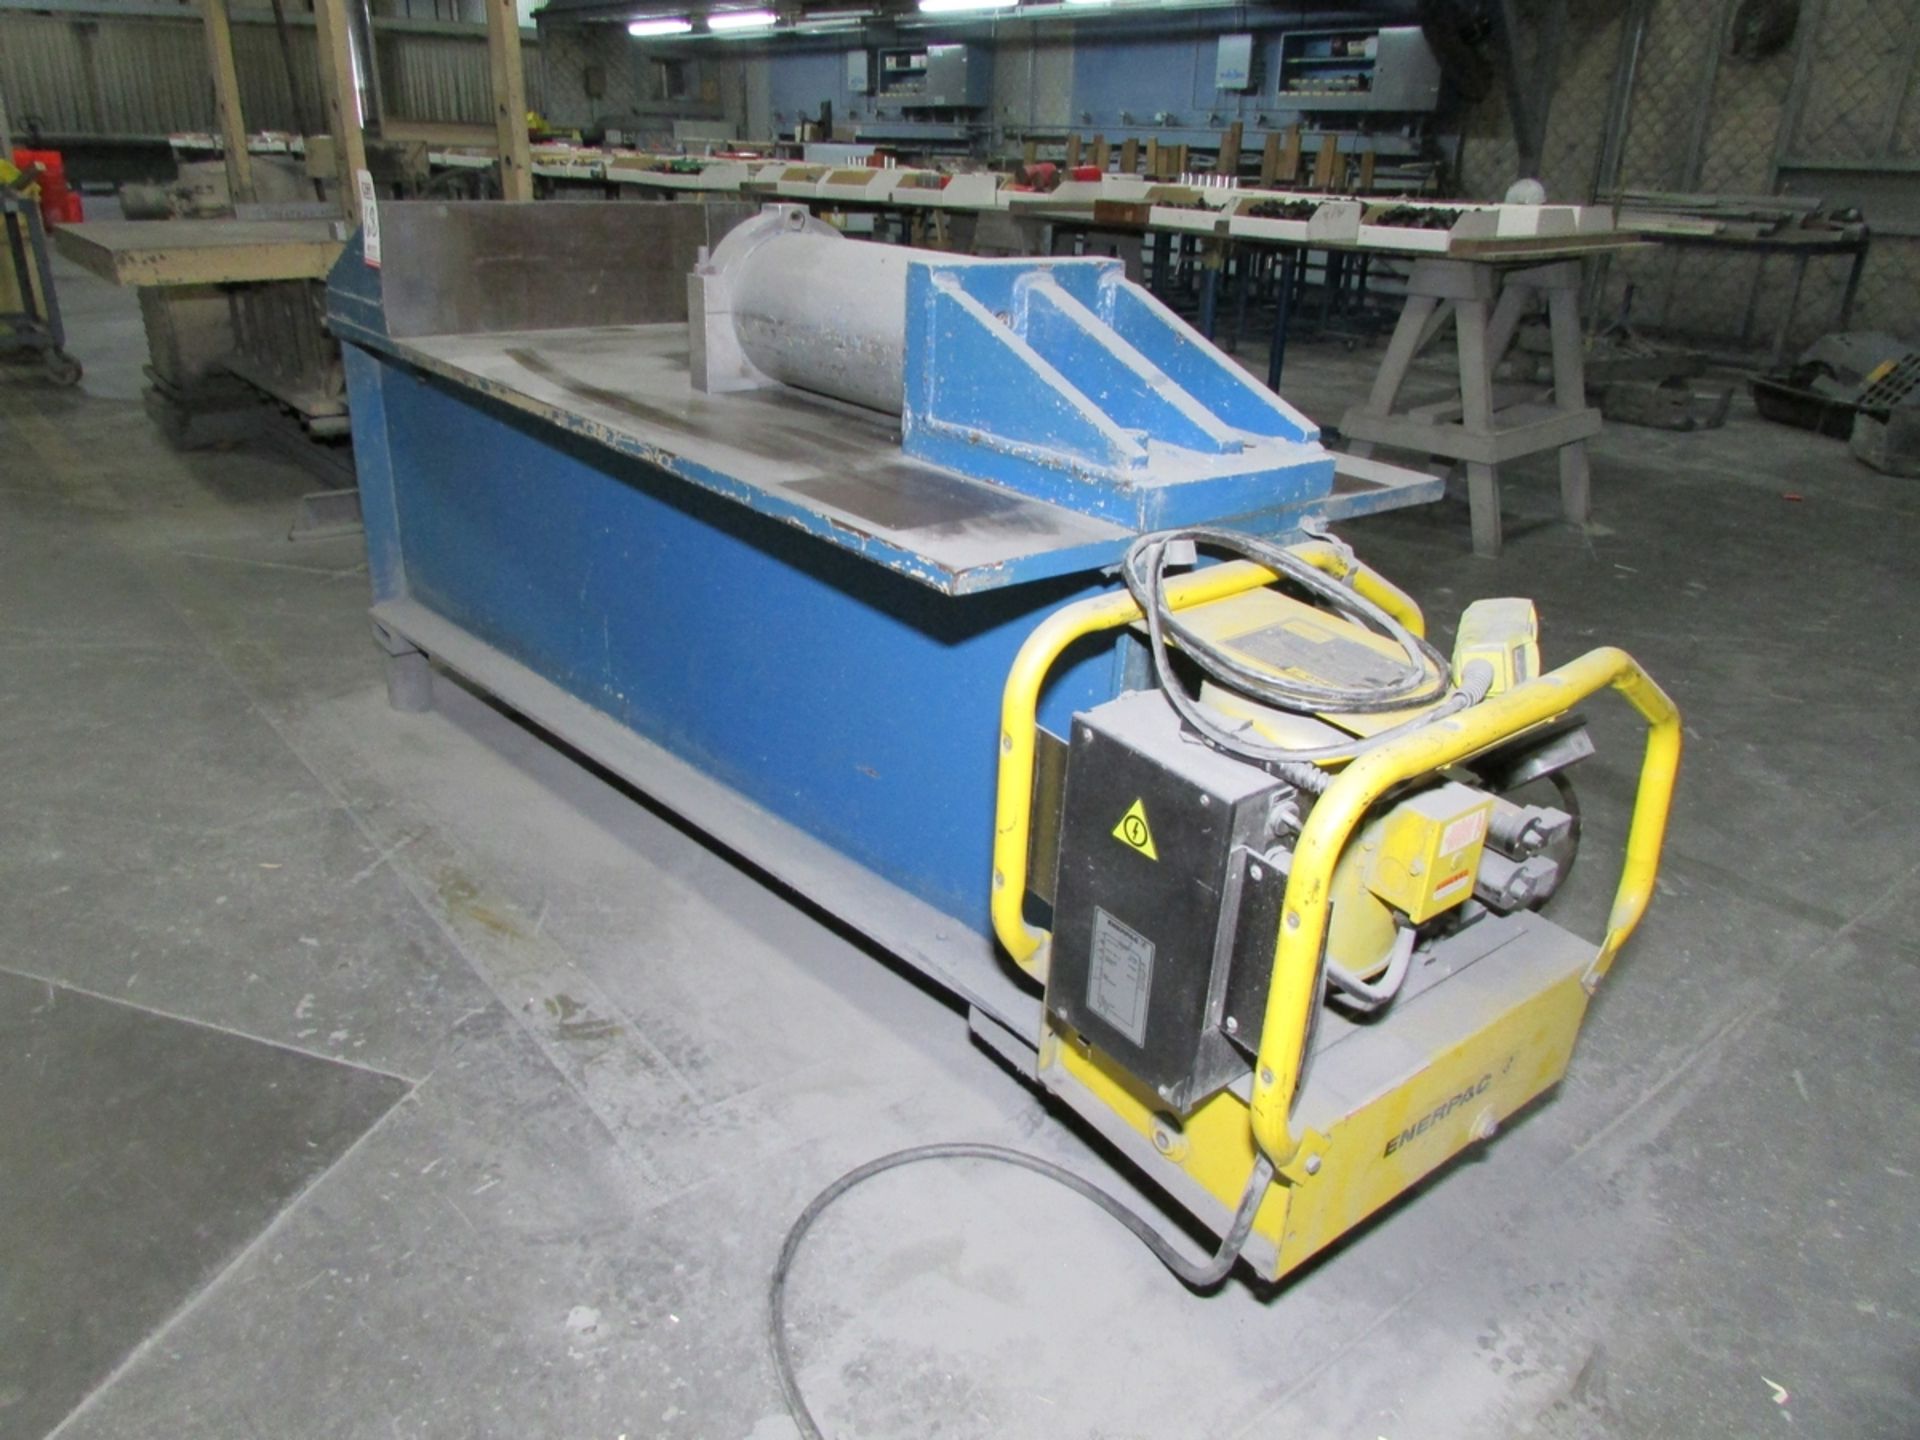 HORIZONTAL HYDRAULIC STRAIGHTENING PRESS, 30" X 9" ANGLE PLATE, 80" X 30" TABLE, ENERPAC GPER5320J - Image 5 of 12